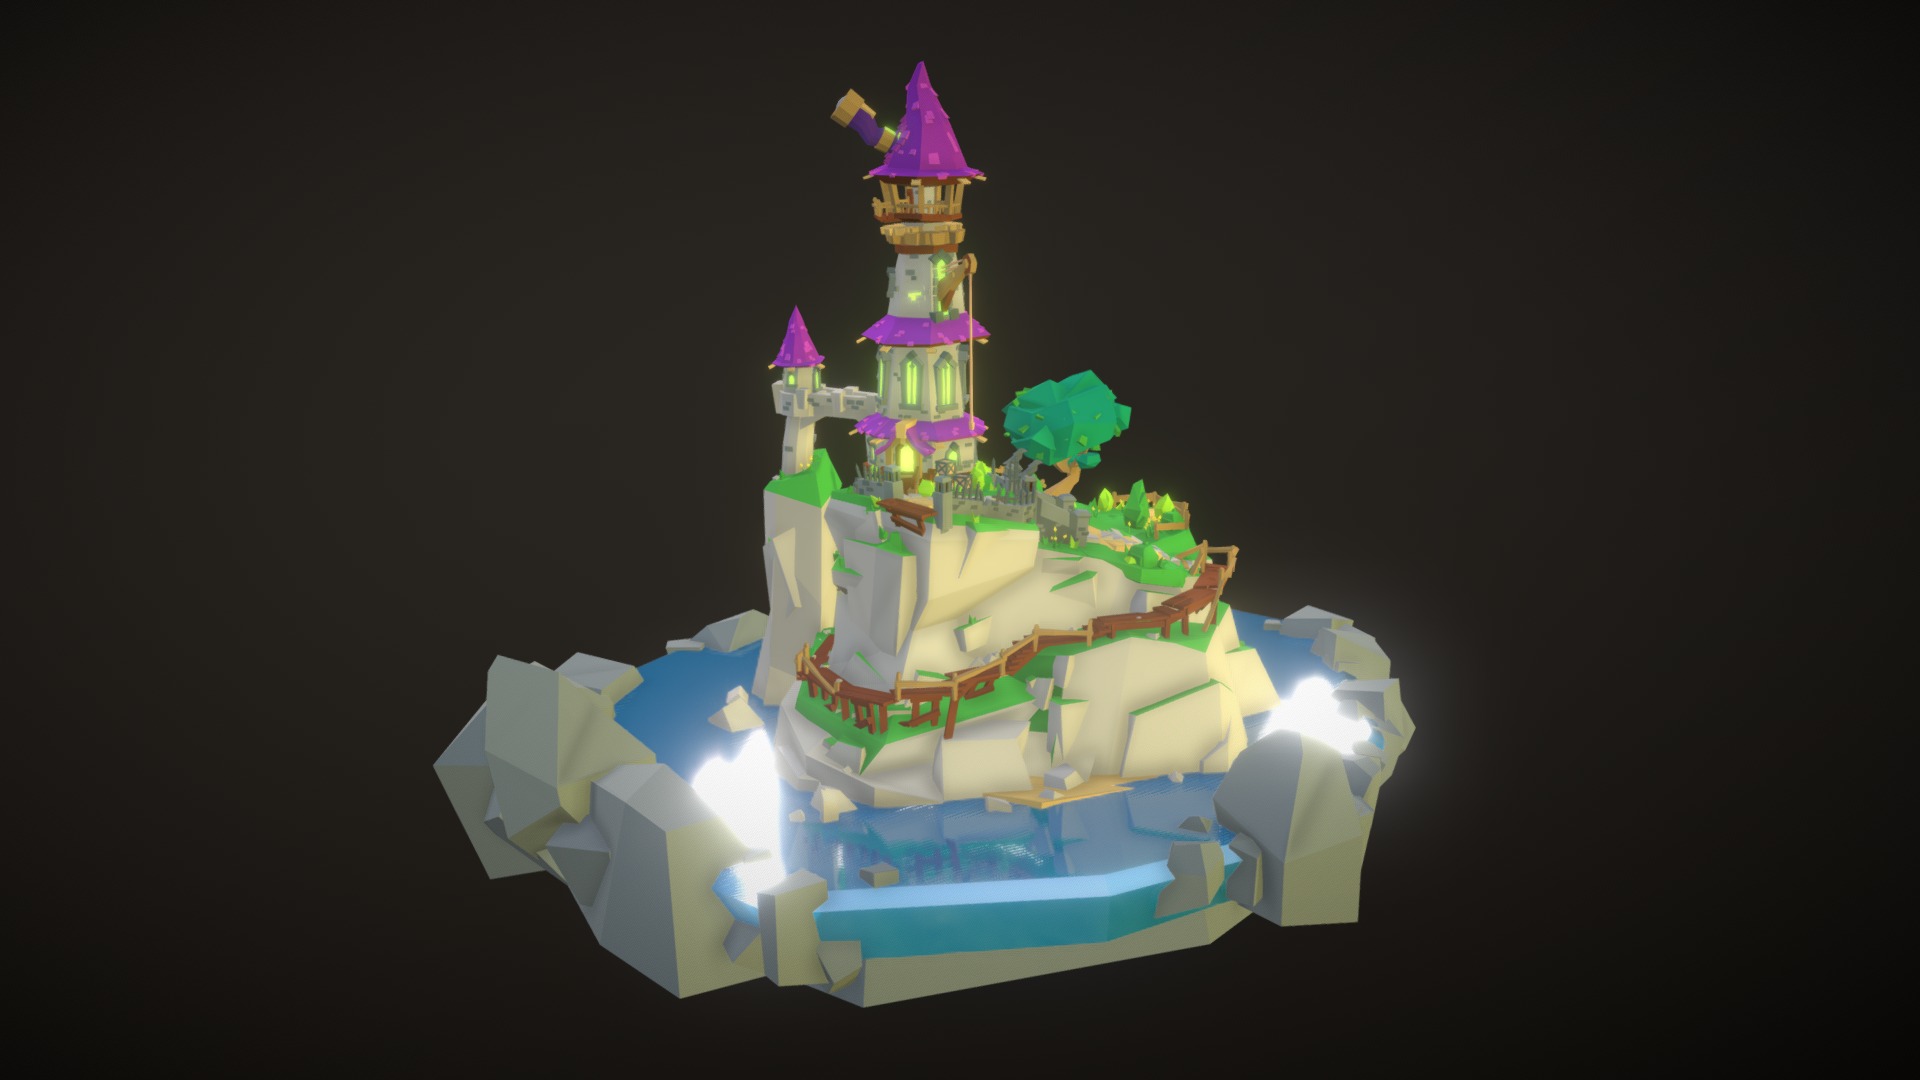 Wizards Tower Download Free 3d Model By Nick Slough Beholderdesign [5507823] Sketchfab